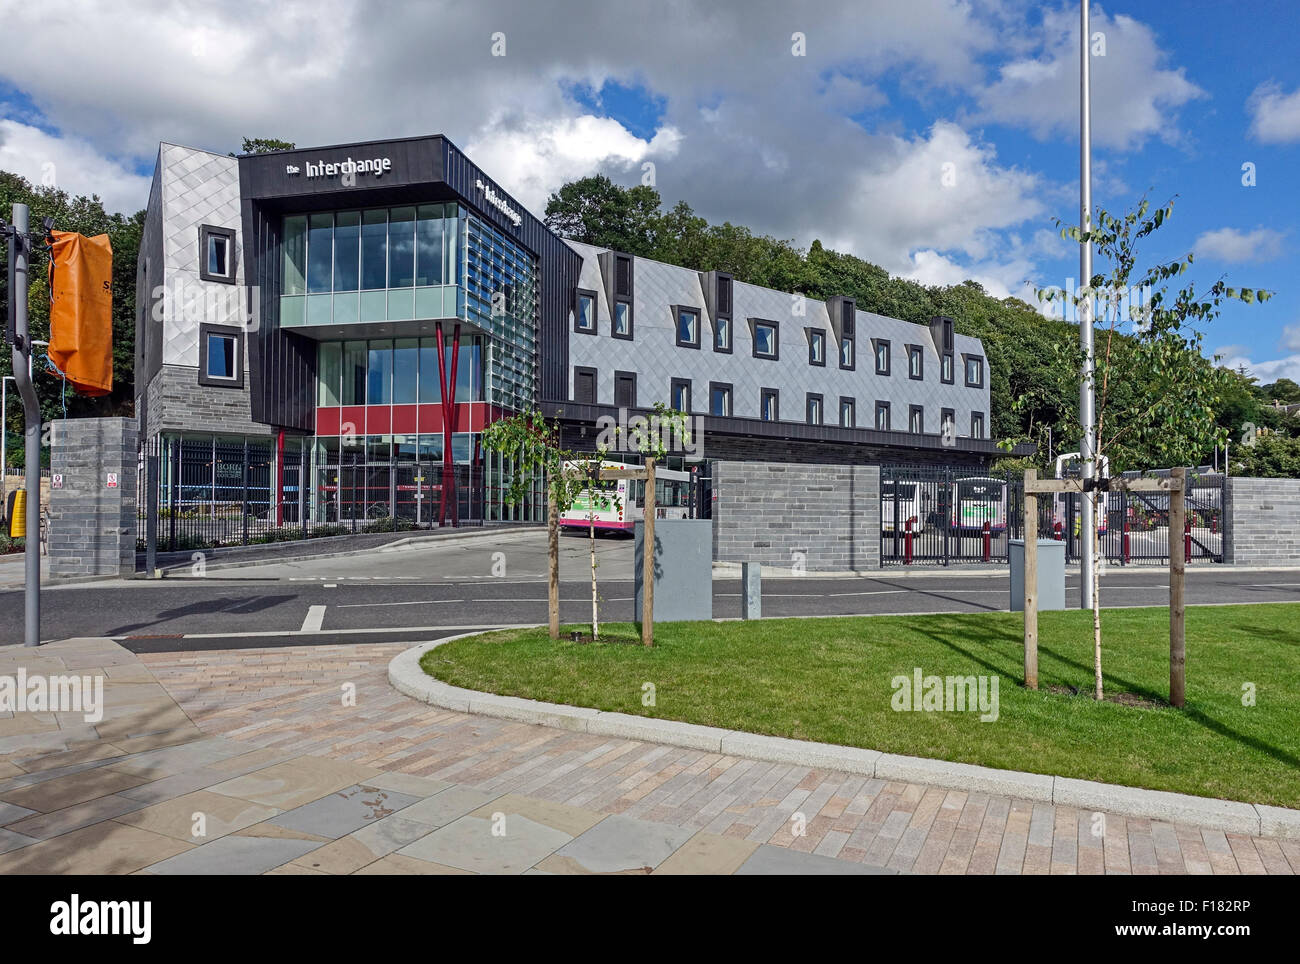 Newly opened The Interchange building connecting train and bus in Galashiels Scottish Borders Scotland Stock Photo